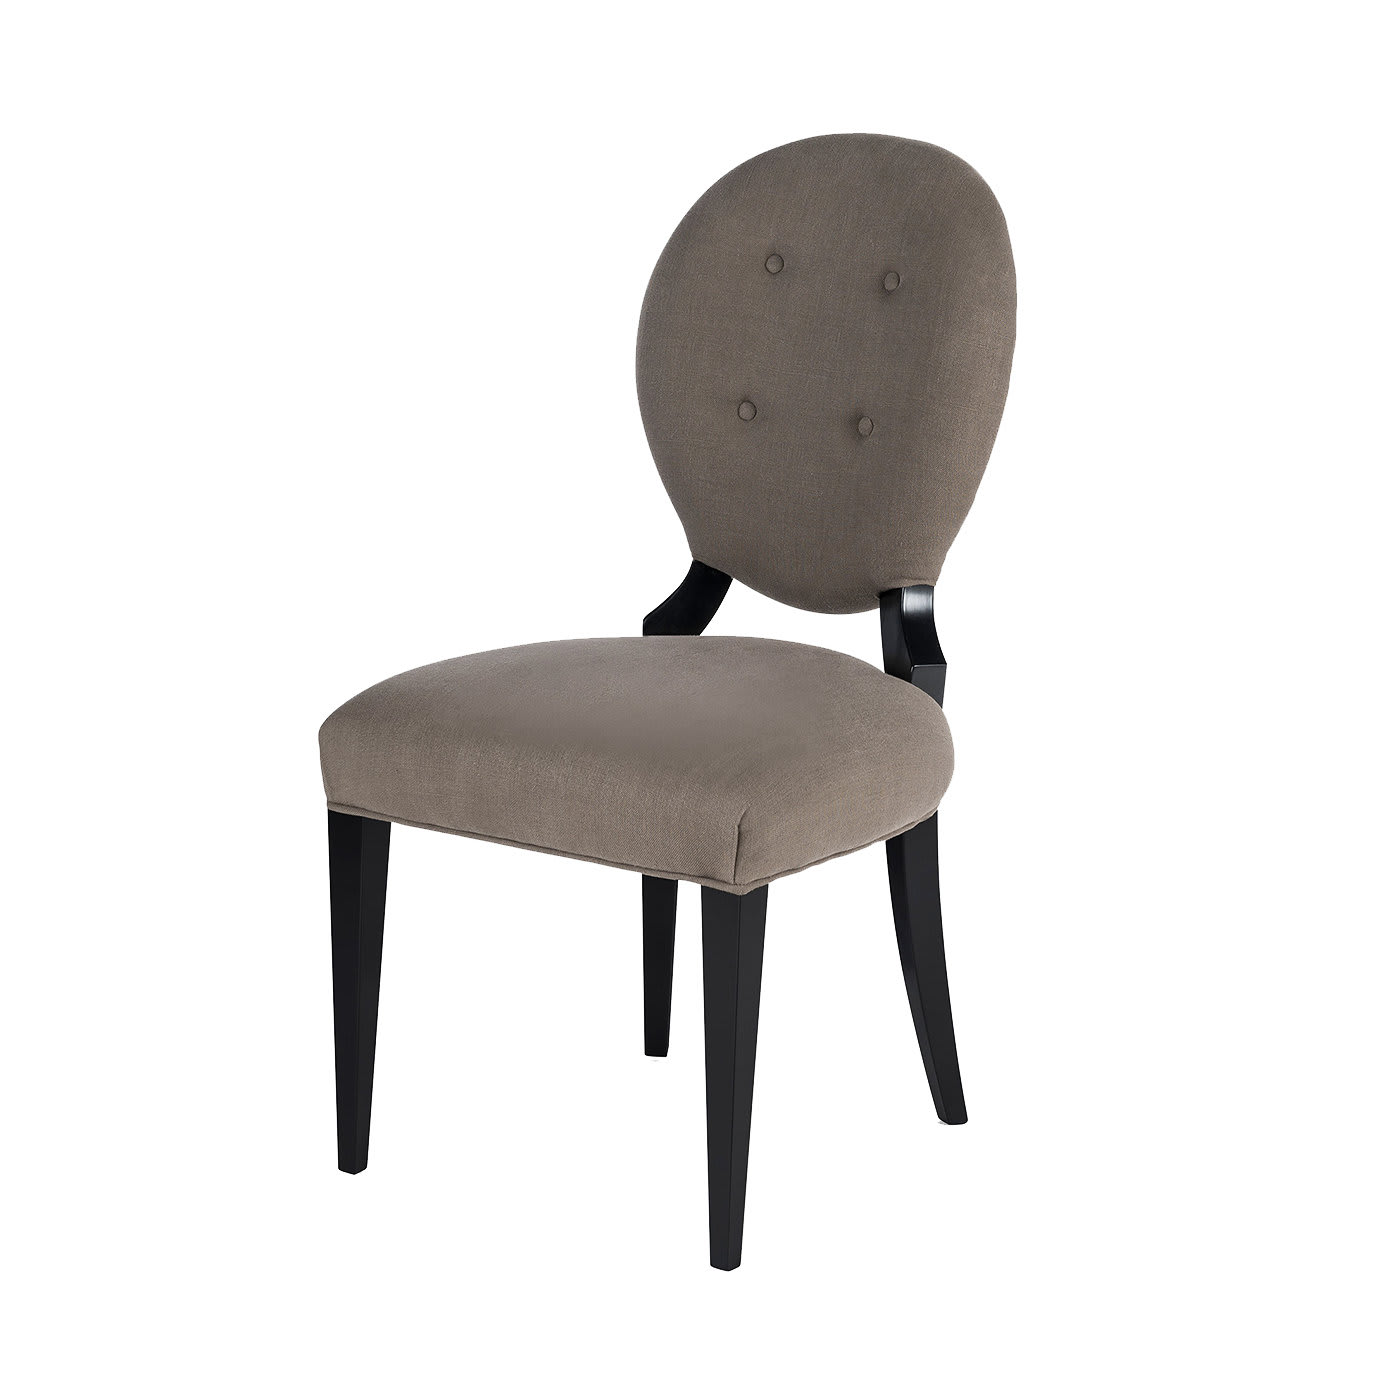 Set of Two Grey Sophia Wood and Fabric Chairs - VGnewtrend